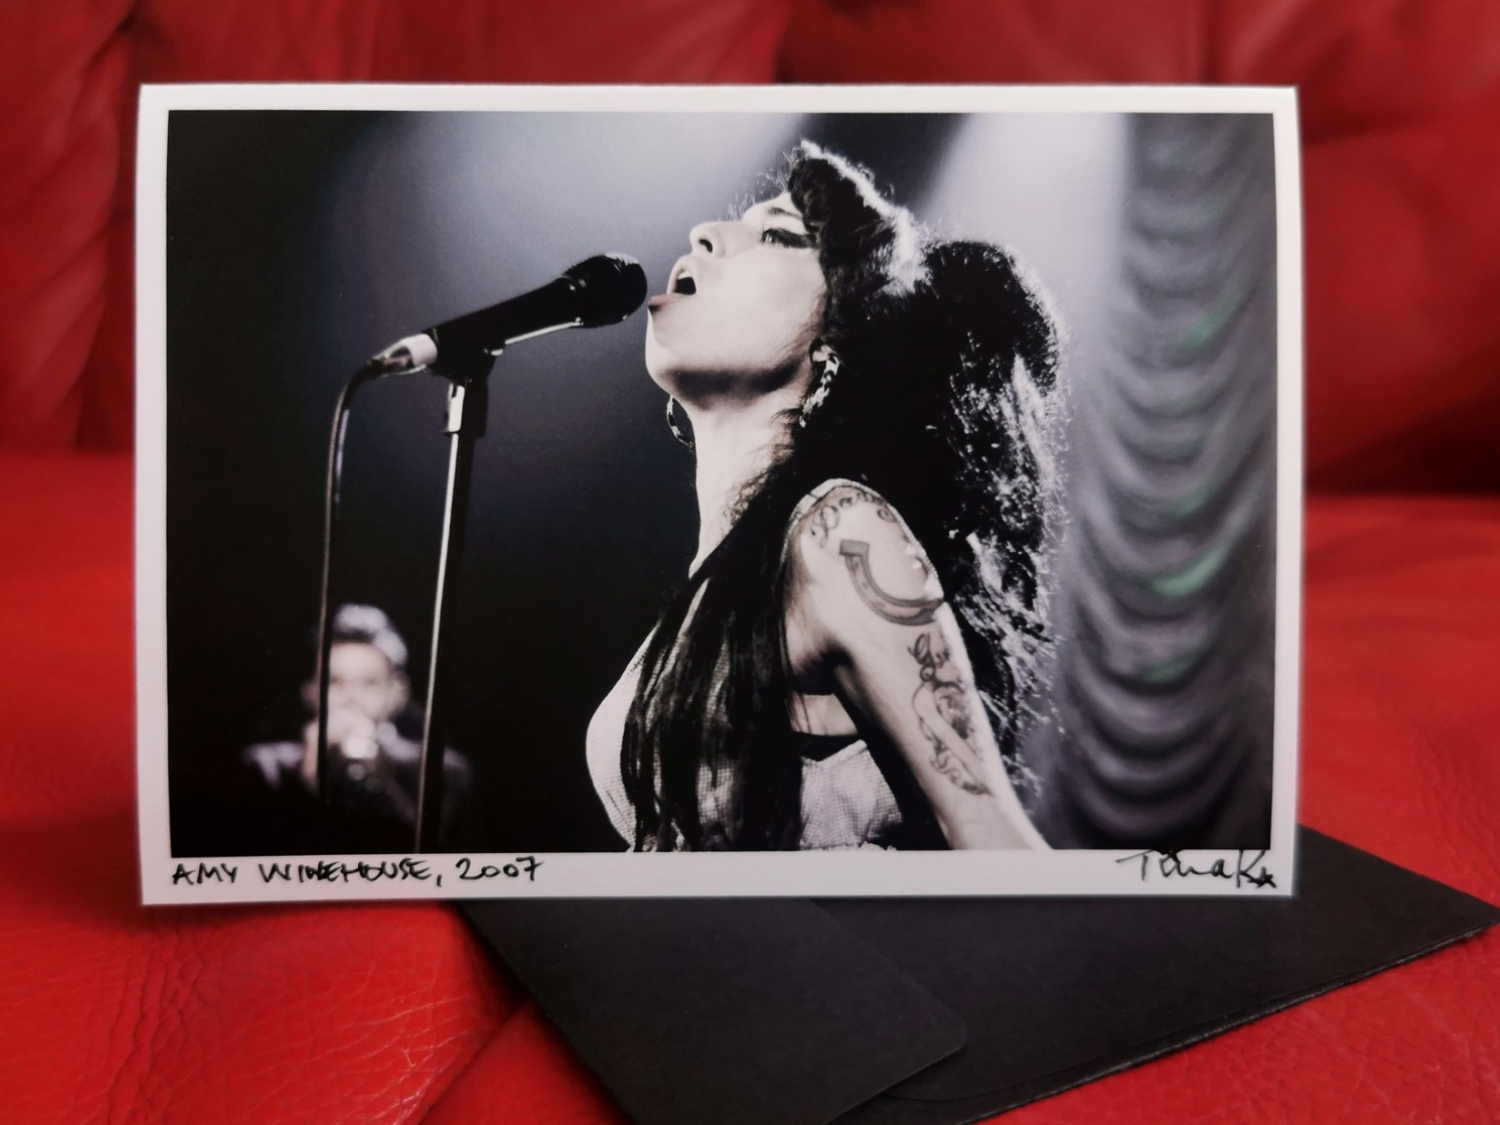 Amy Winehouse on stage in 2007, Back to Black Tour (A6 Print by Tina K Photography)